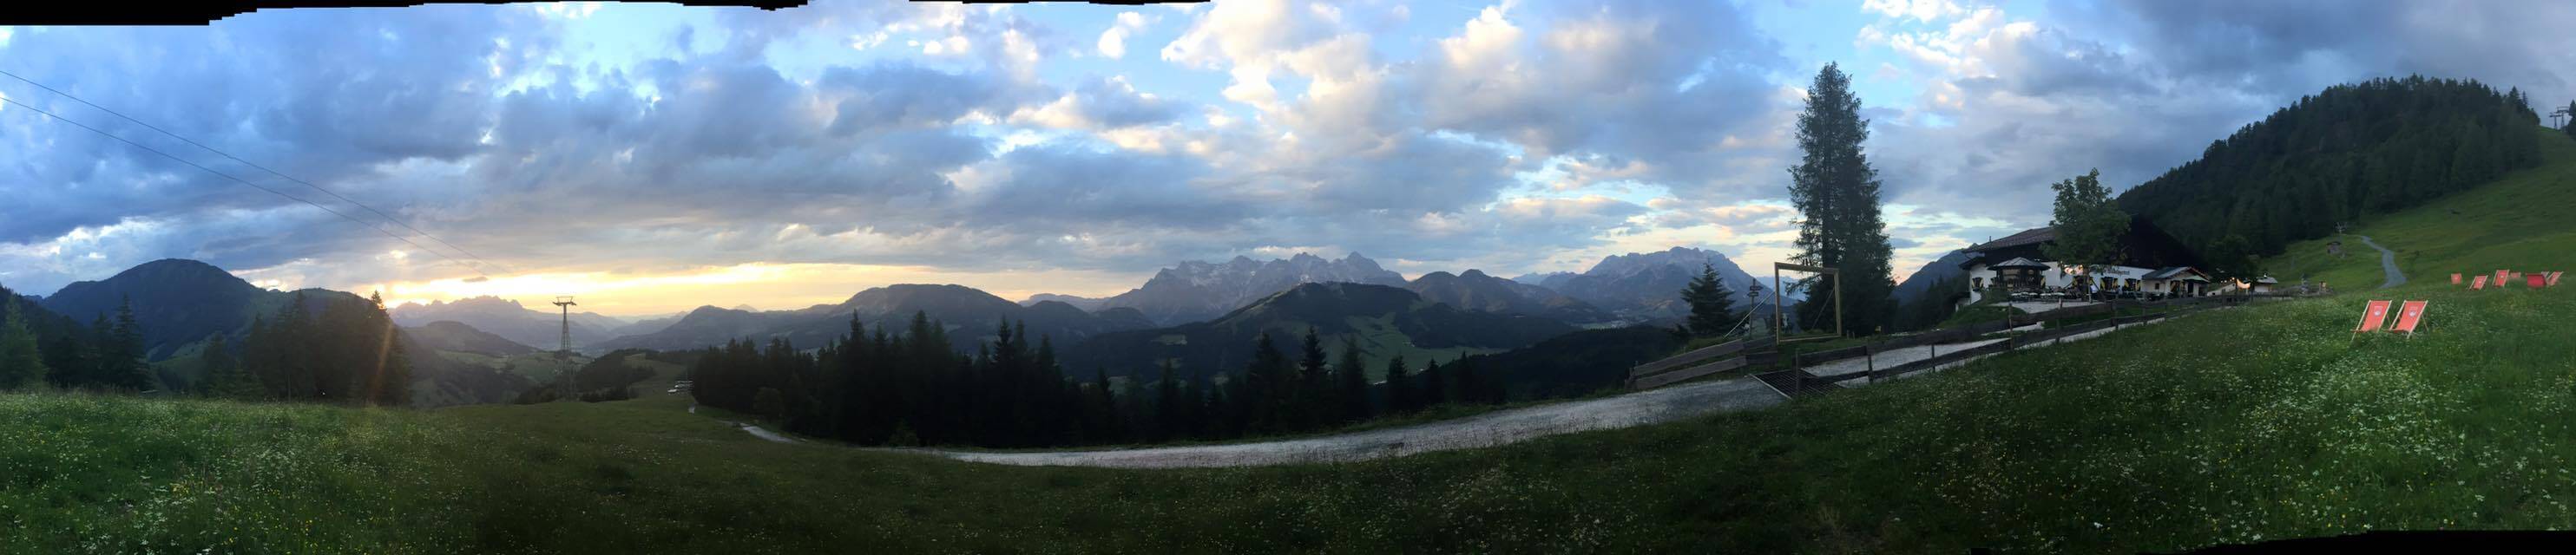 Hiking in the Austrian mountains